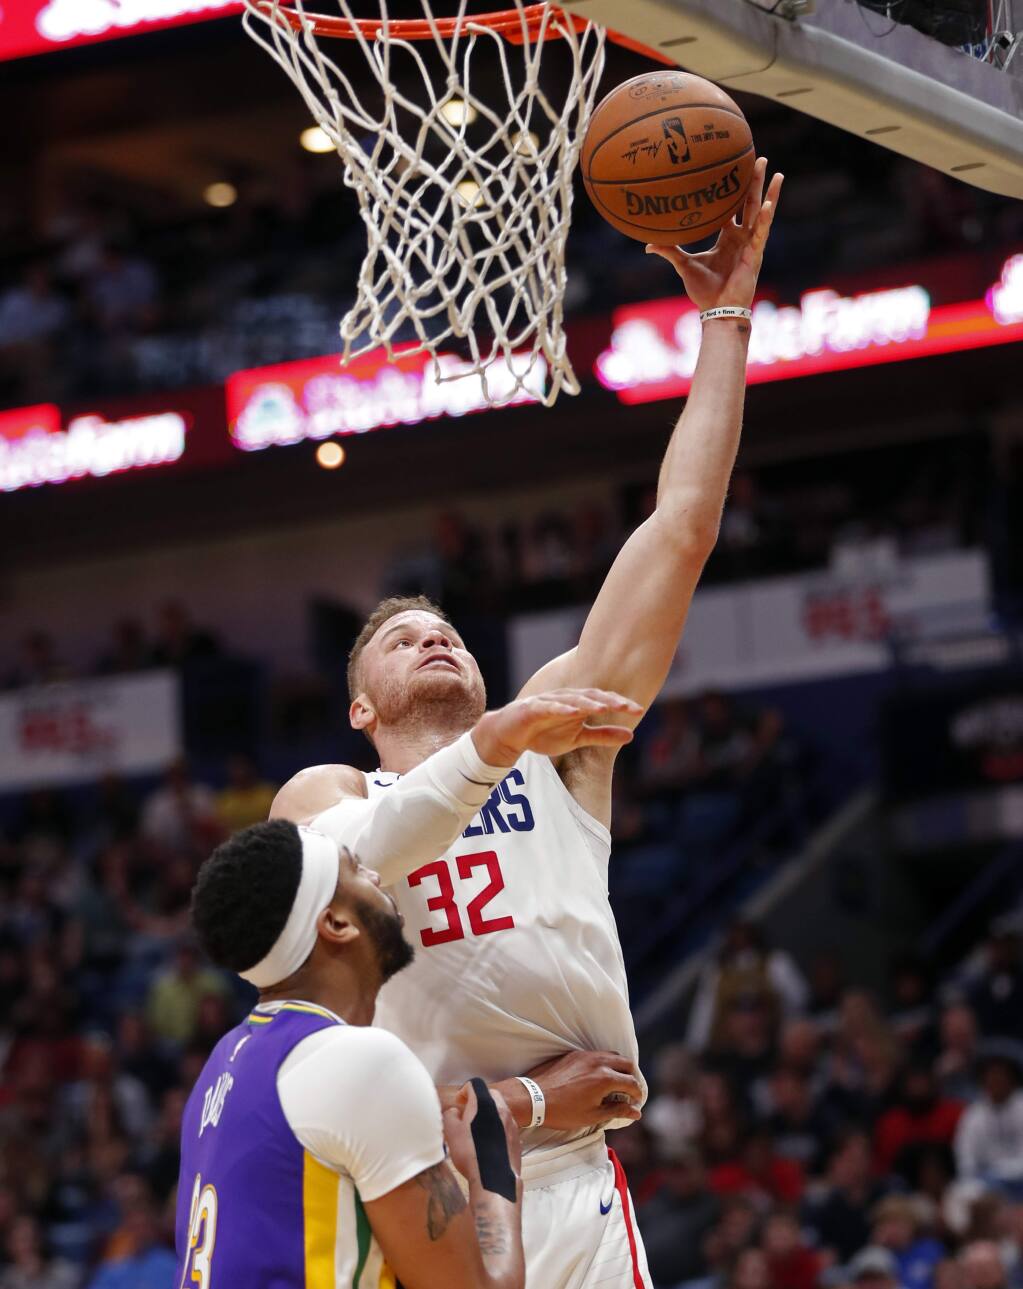 L.A. Clippers star Blake Griffin to undergo surgery to remove